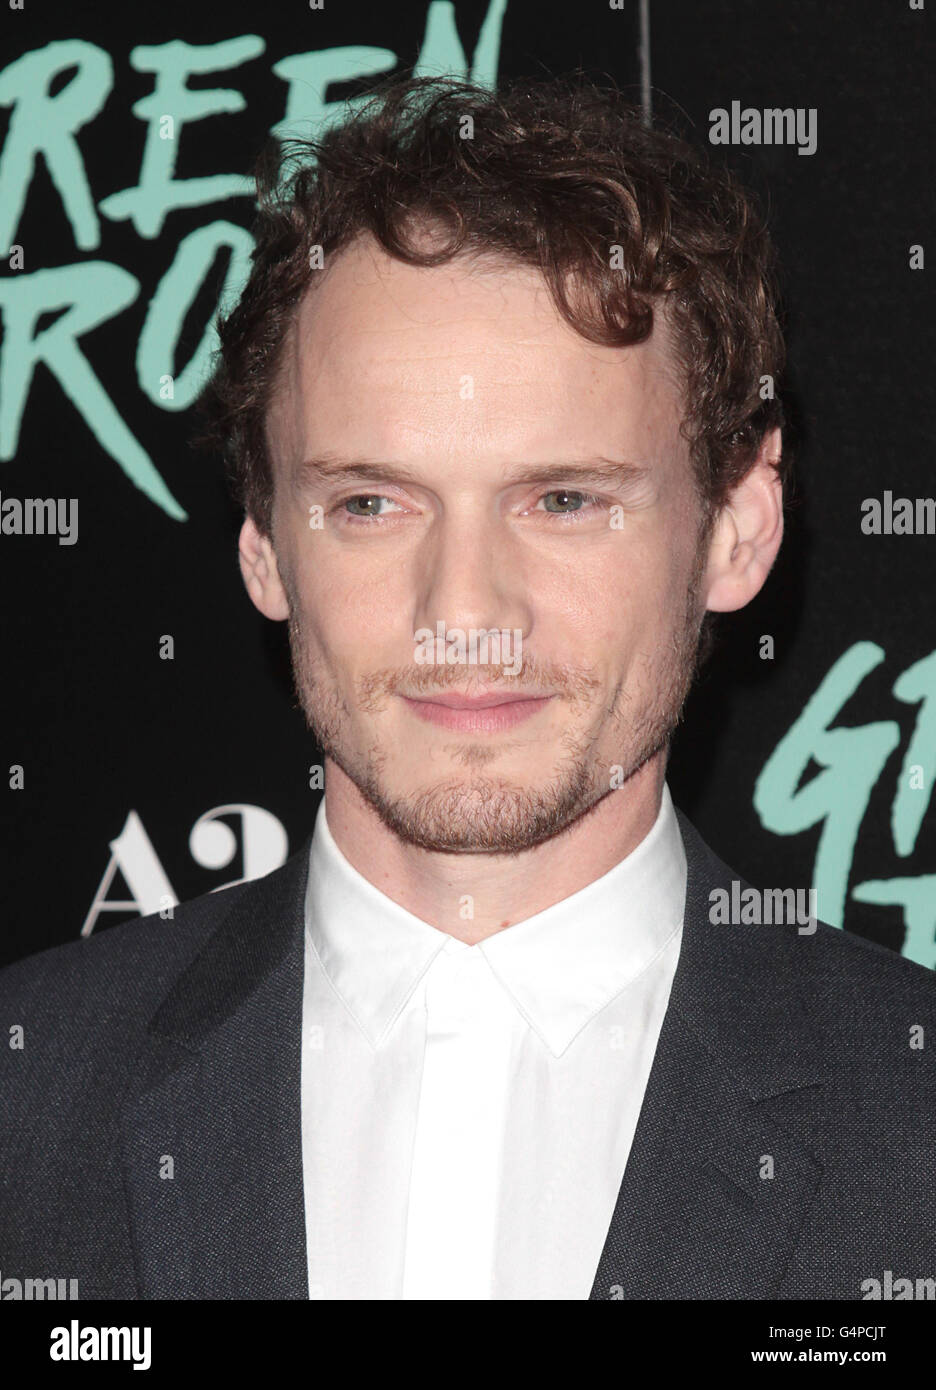 Star Trek actor ANTON YELCHIN has died in a freak car accident at the age of 27. The body of the Russian-born actor was found at around 1am on his driveway in San Fernando, California. He had been hit by his own car. PICTURED: Sept. 10, 2015 - Toronto, California, Canada - Actor ANTON YELCHIN attends the premiere of 'The Green Room' during the 40th Toronto International Film Festival. © Adam Orchon/AdMedia/ZUMA Wire/Alamy Live News Stock Photo